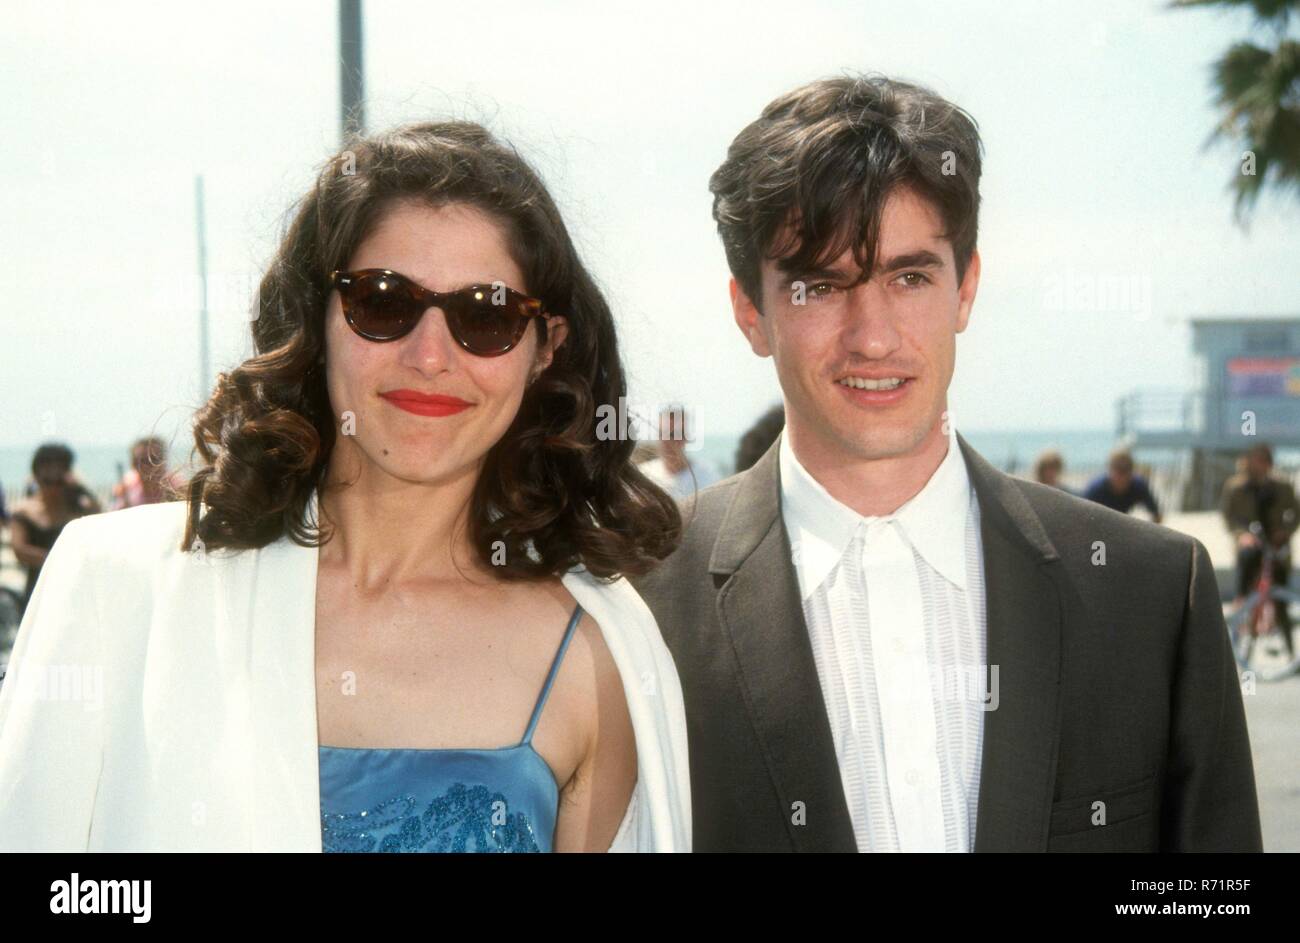 SANTA MONICA, CA - MARCH 27: Actress Catherine Keener and husband actor Dermot Mulroney attend the Eighth Annual IFP/West Independent Spirit Awards on March 27, 1993 at the Santa Monica Beach in Santa Monica, California. Photo by Barry King/Alamy Stock Photo Stock Photo